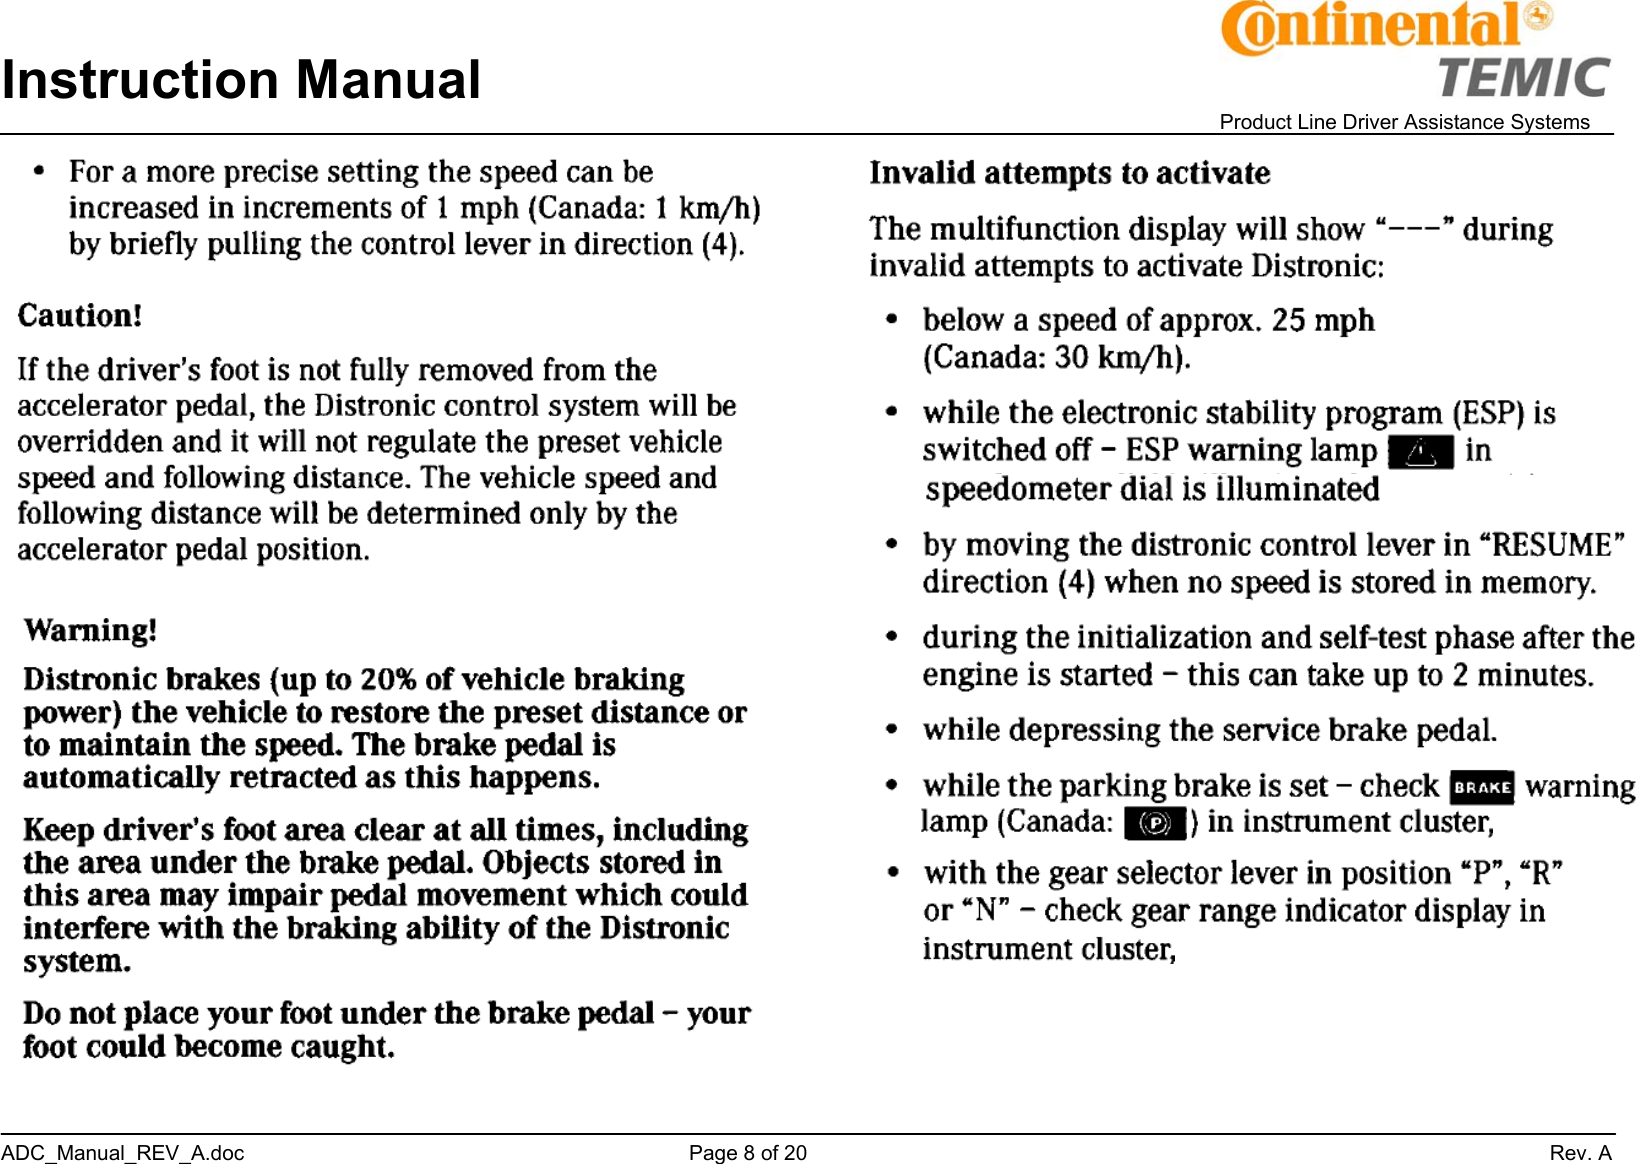 Instruction Manual    Product Line Driver Assistance Systems ADC_Manual_REV_A.doc     Page 8 of 20                 Rev. A        